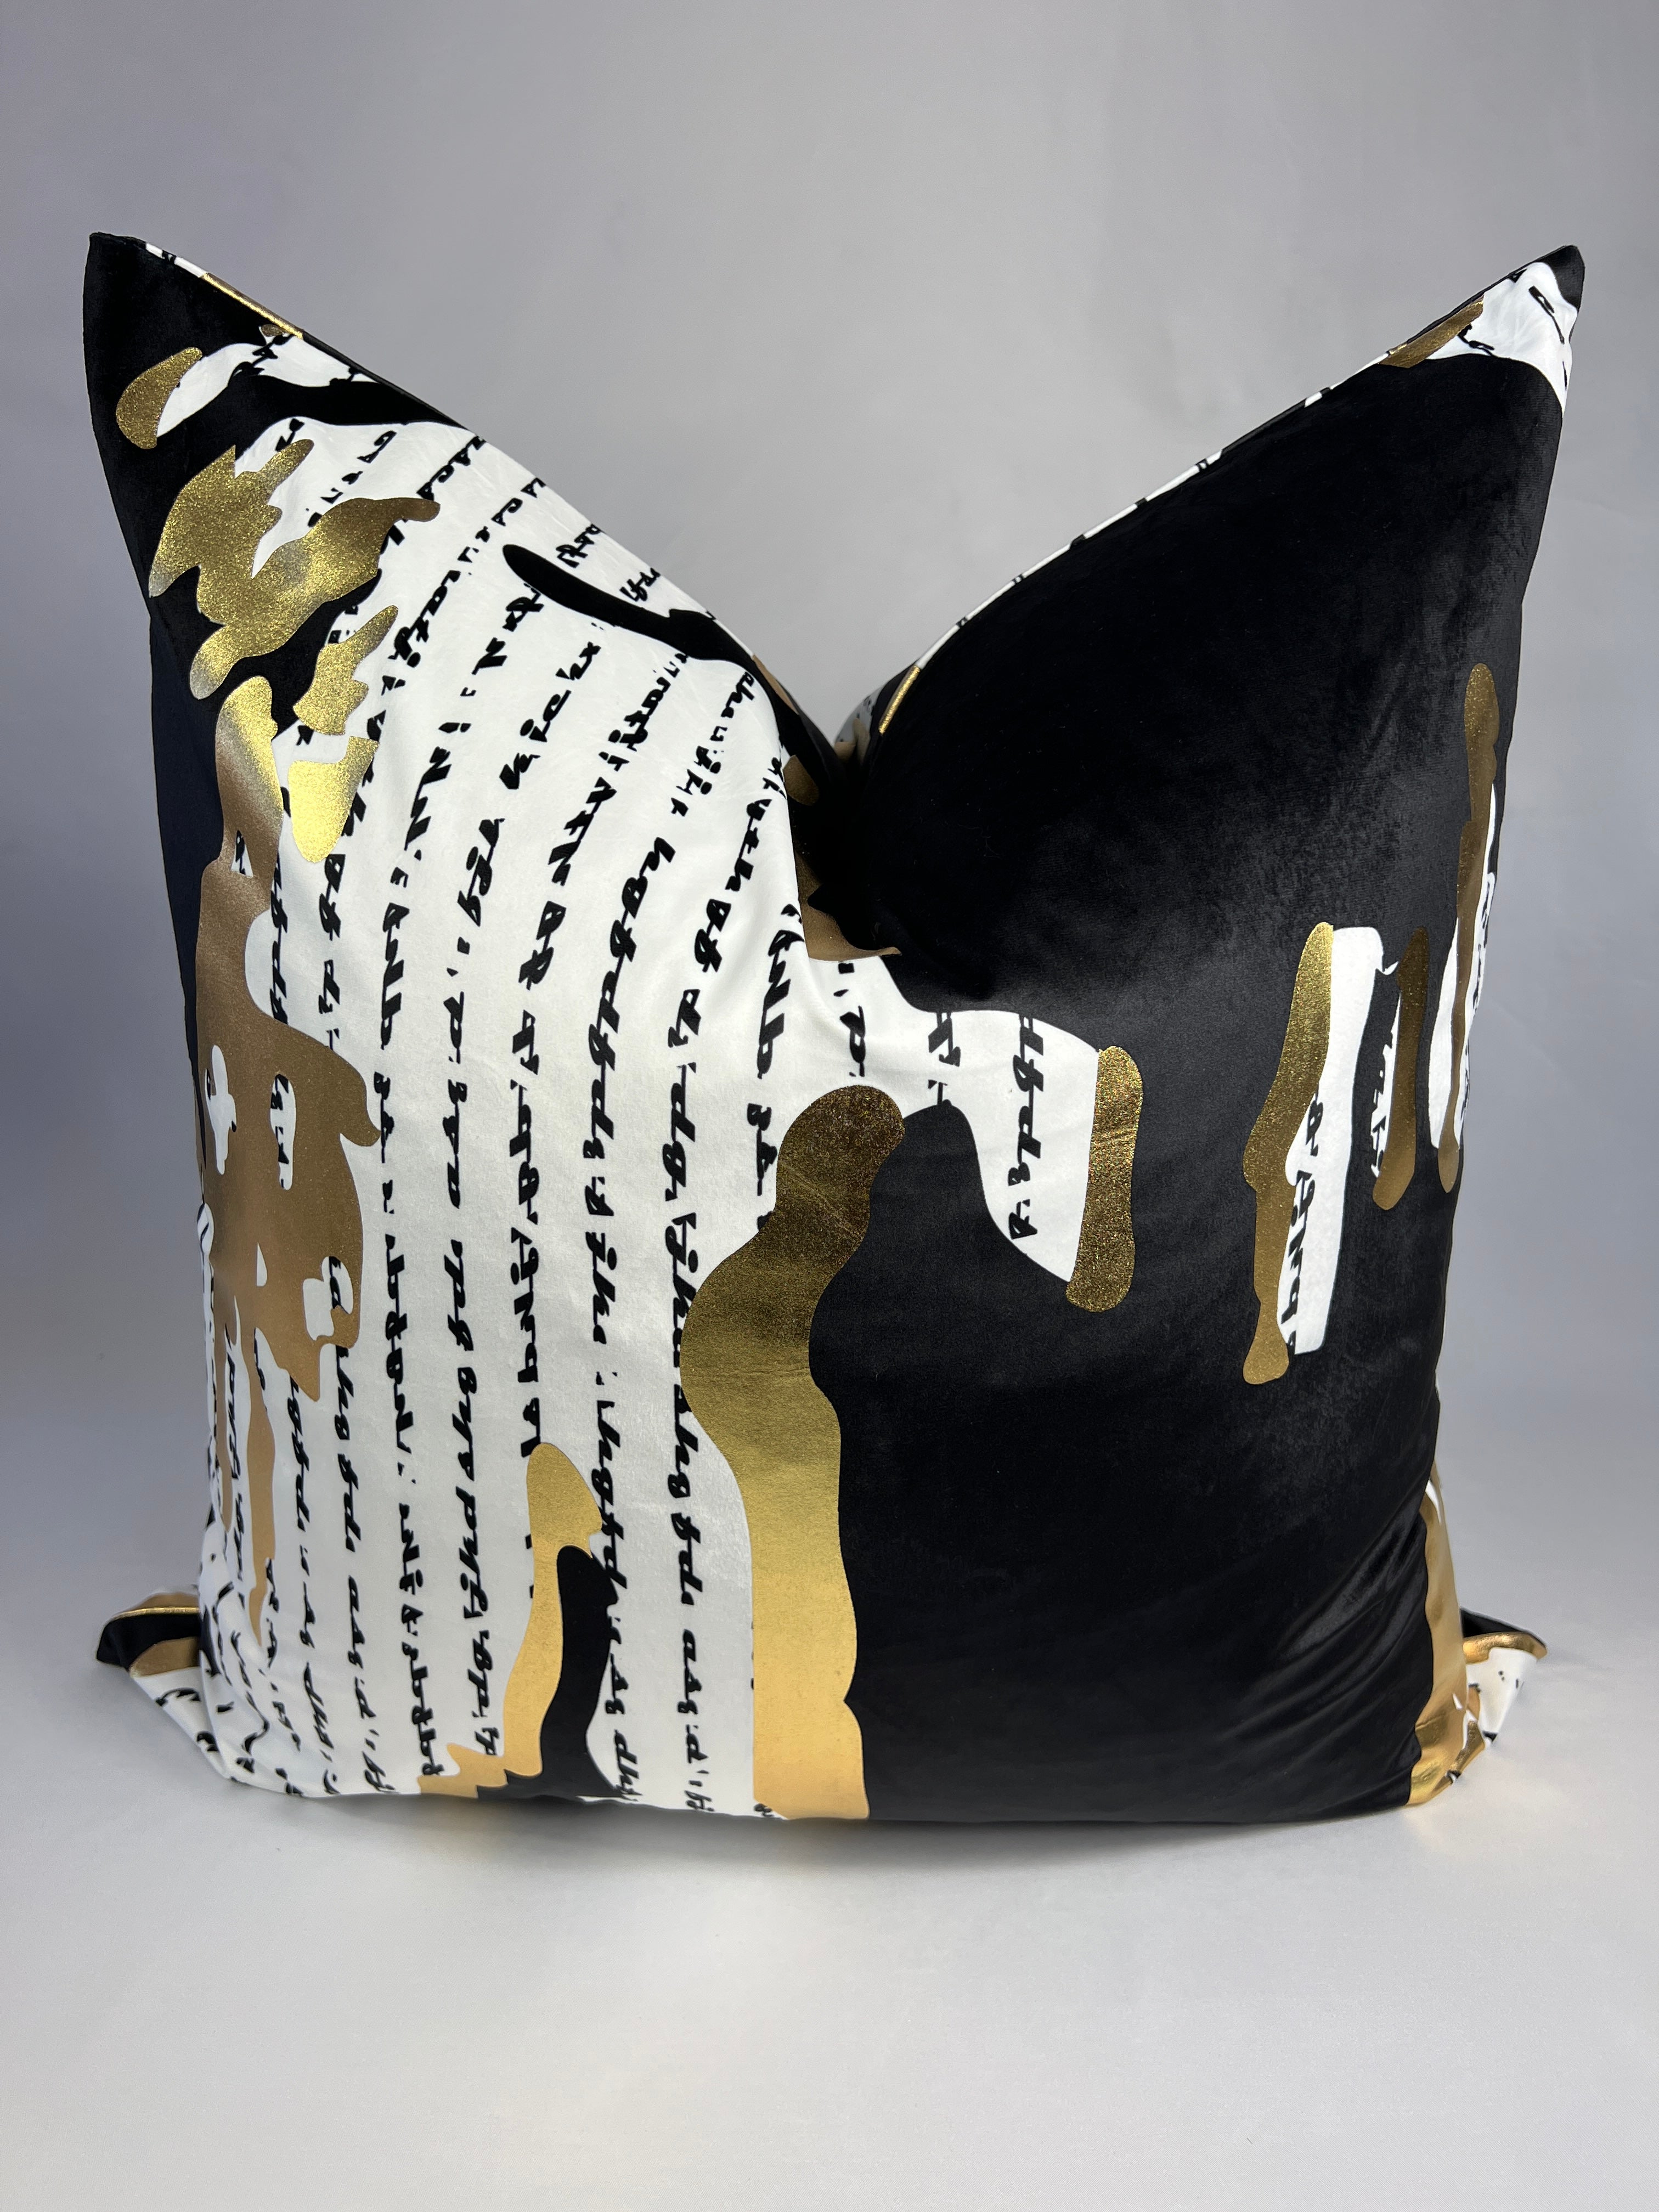 The Coco Pillow in Black, Gold, & White